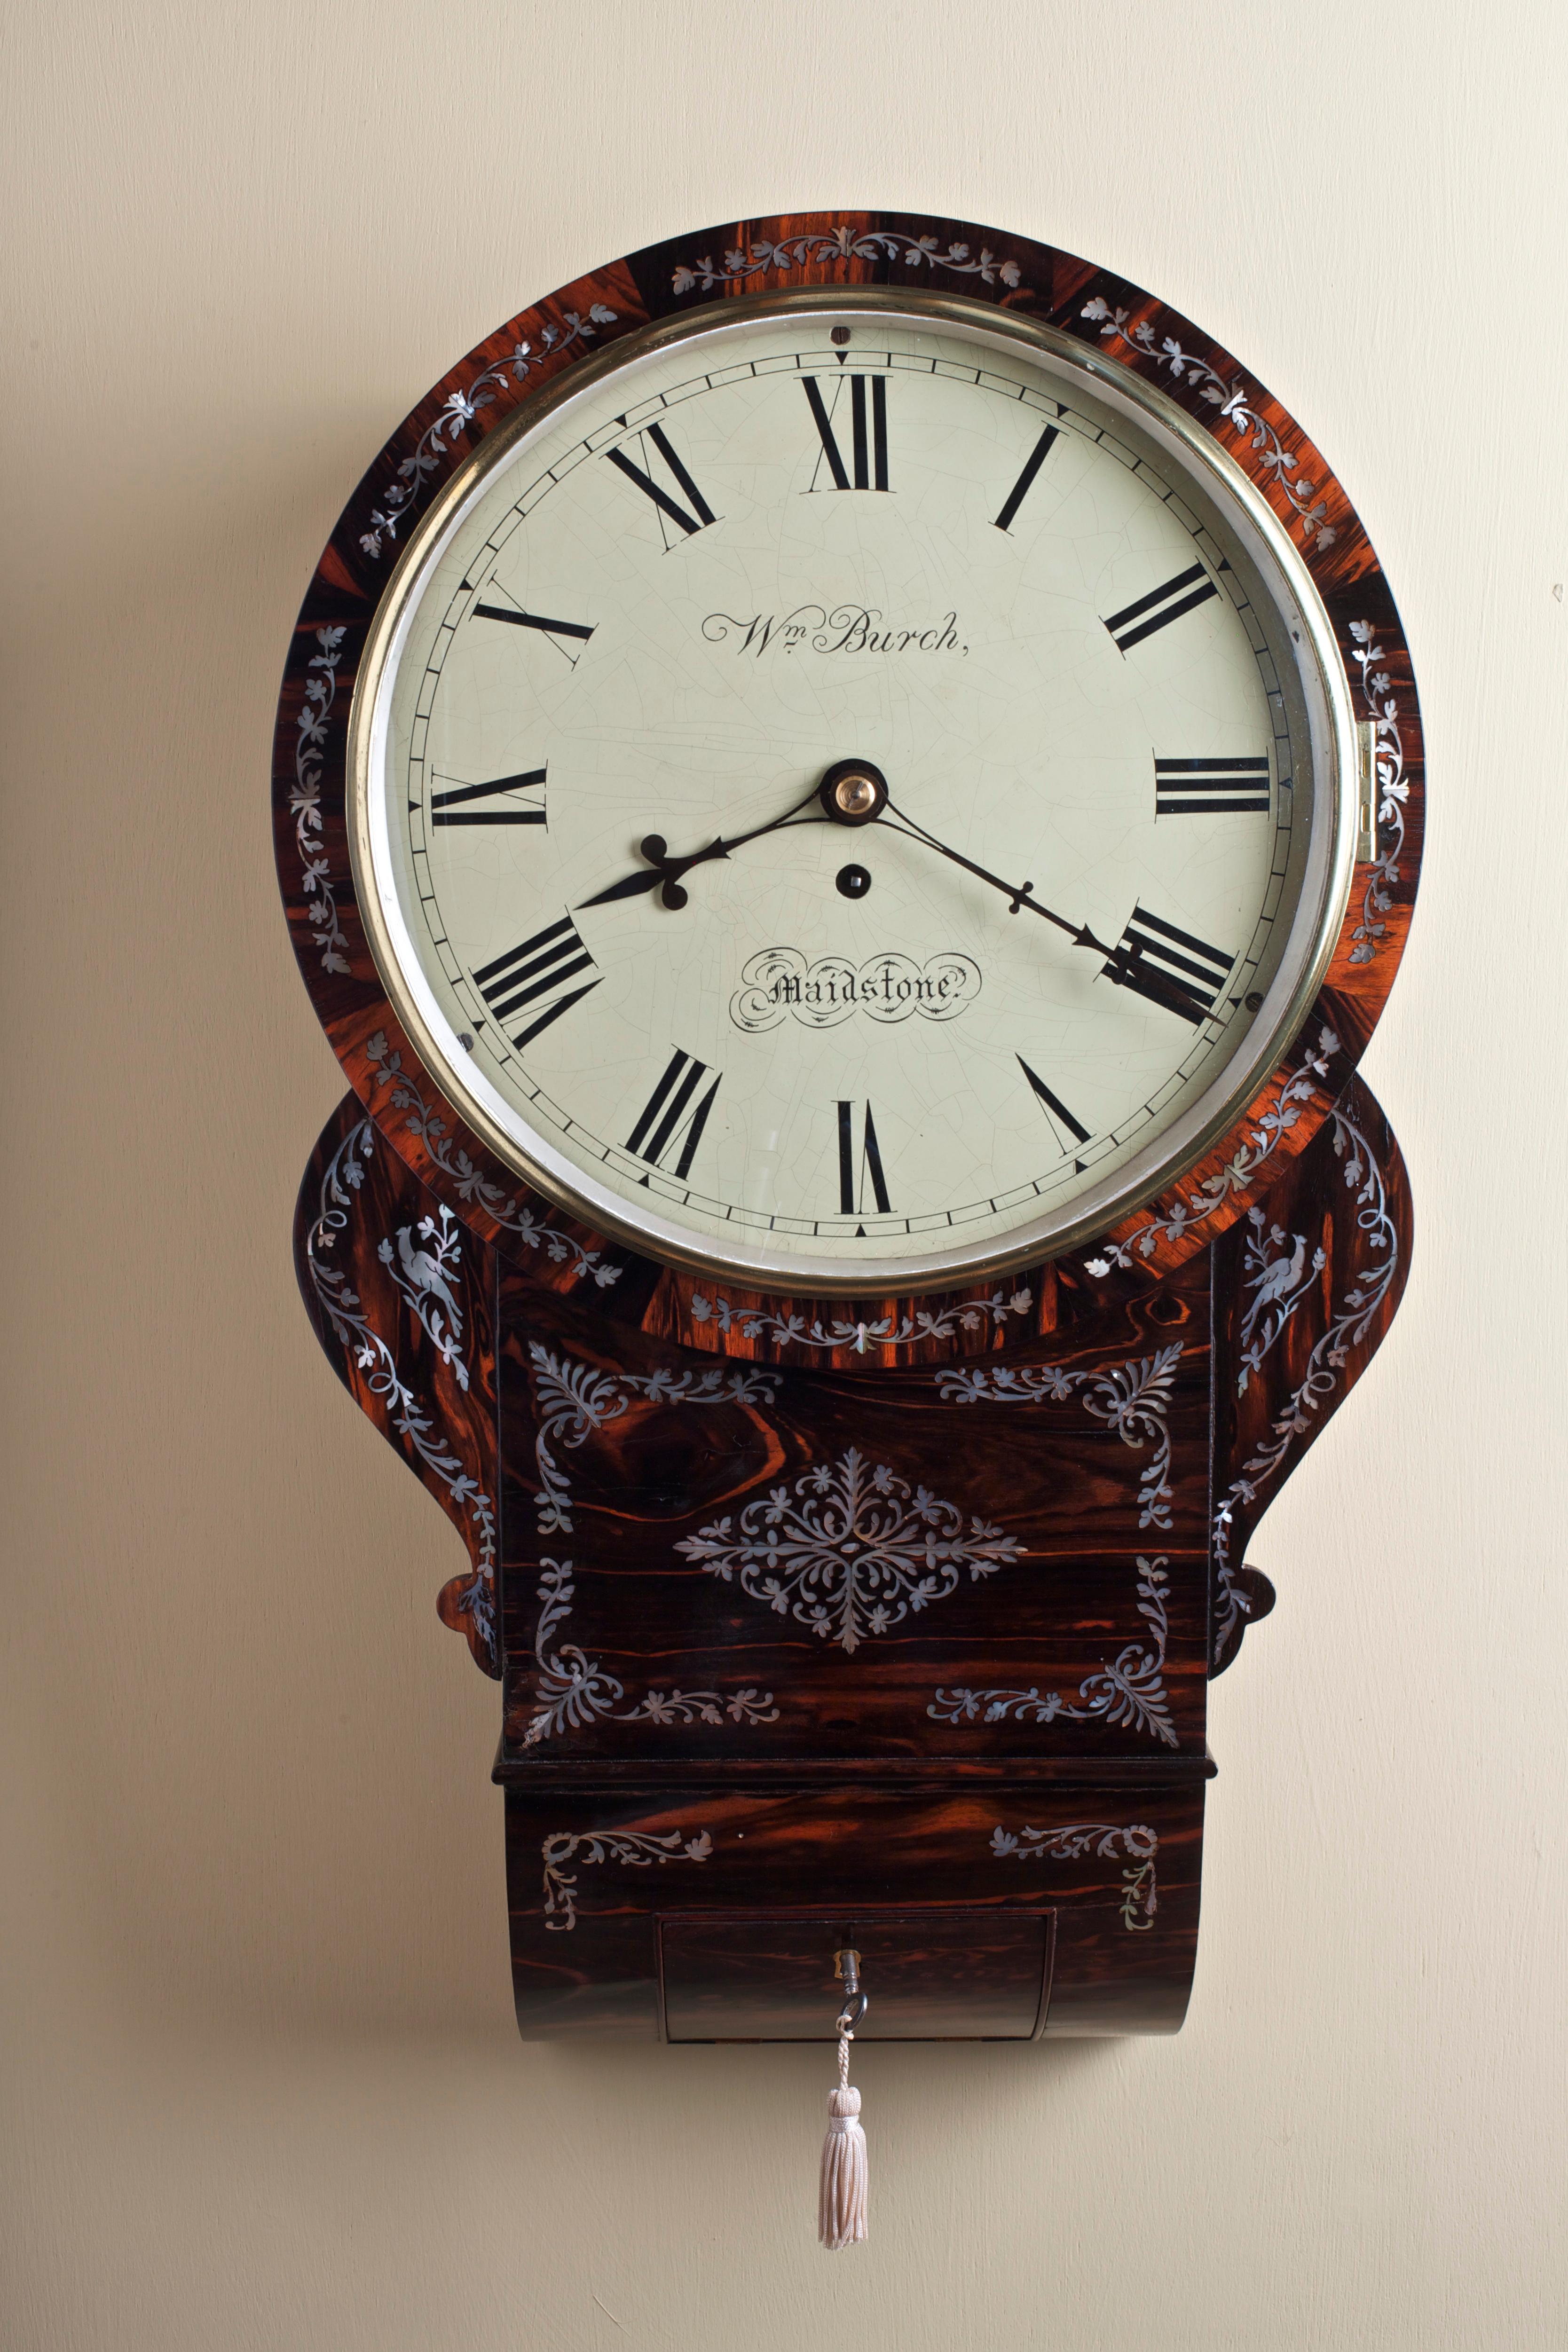 Regency English Coromandel Drop Dial Wall Clock by William Burch, Maidstone In Good Condition For Sale In Norwich, GB